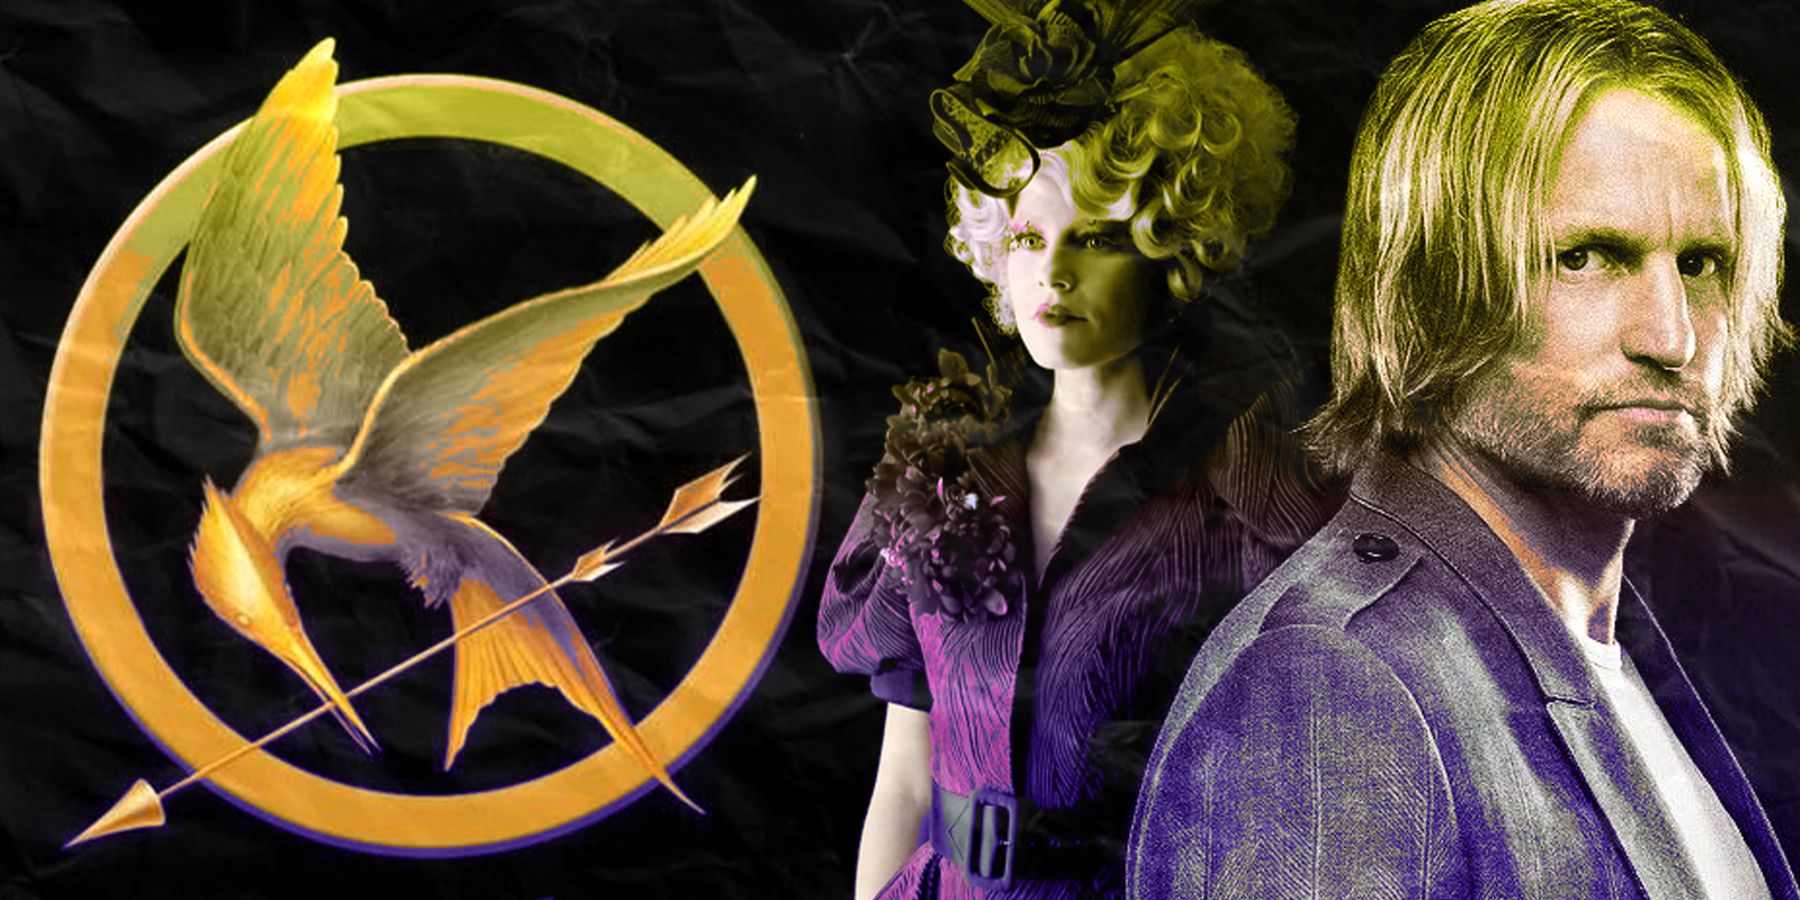 The Hunger Games' Effie and Haymitch alongside the Mockingjay logo.